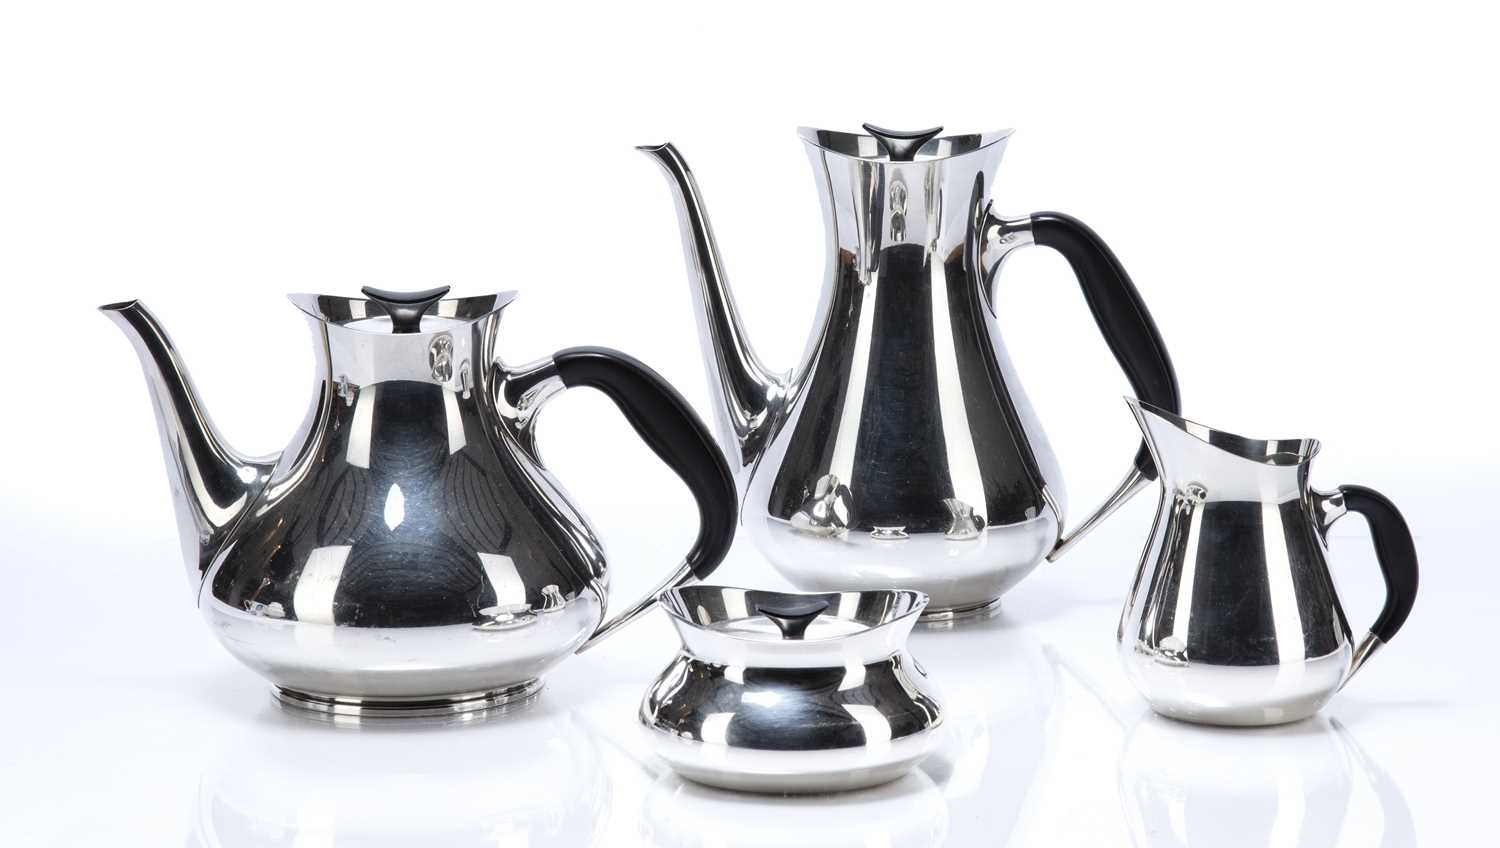 Danish silver plated four piece tea or coffee service by Hans Bunde